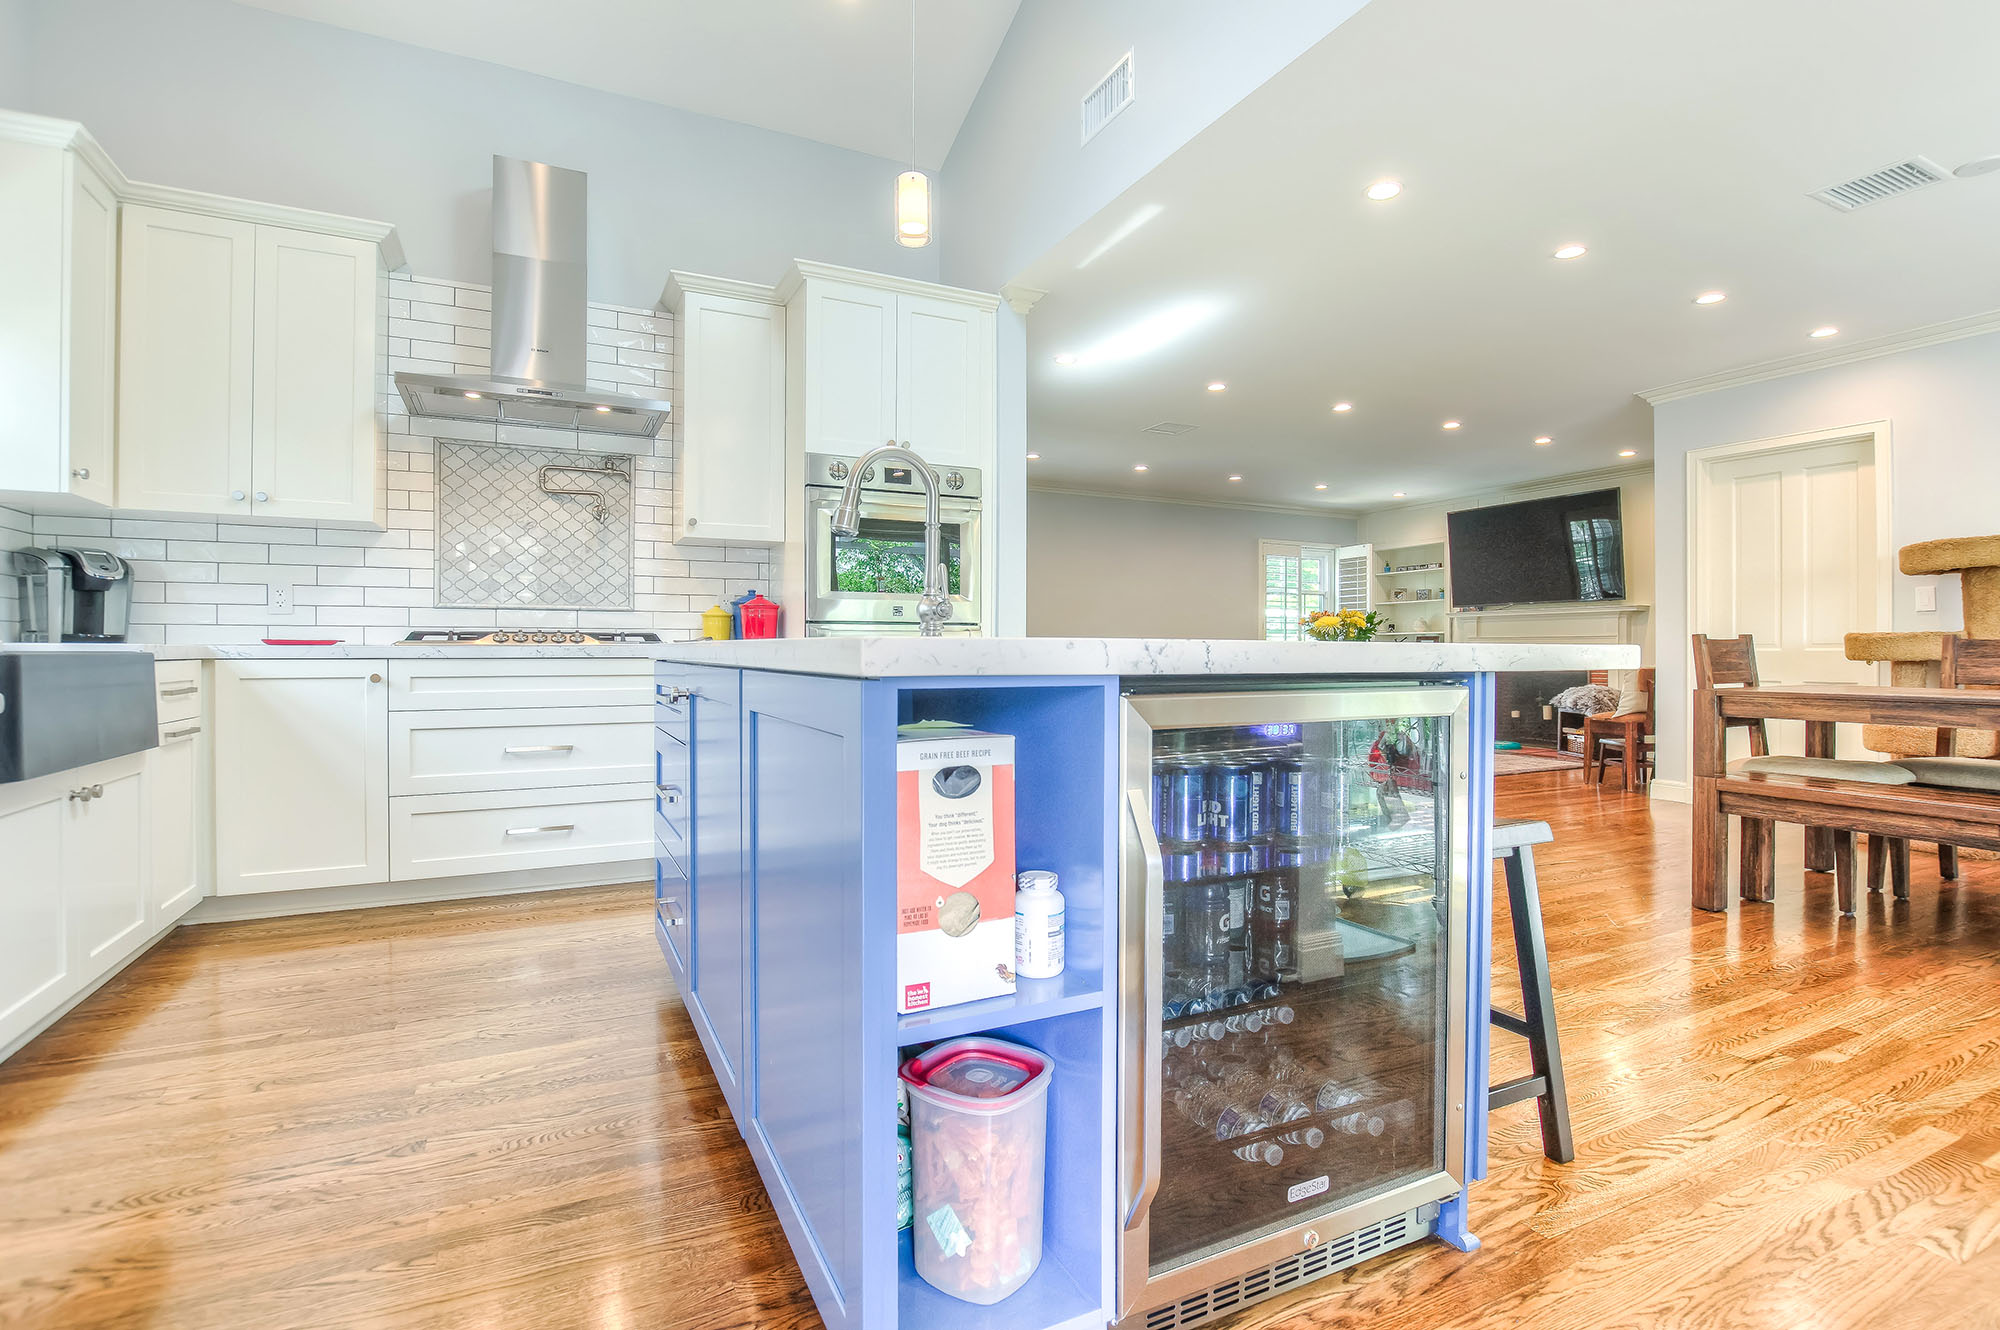  To add a focal point and a pop of color to the all-white bright kitchen we created a custom island in blue with an extra sink, storage space and a wine cooler. 